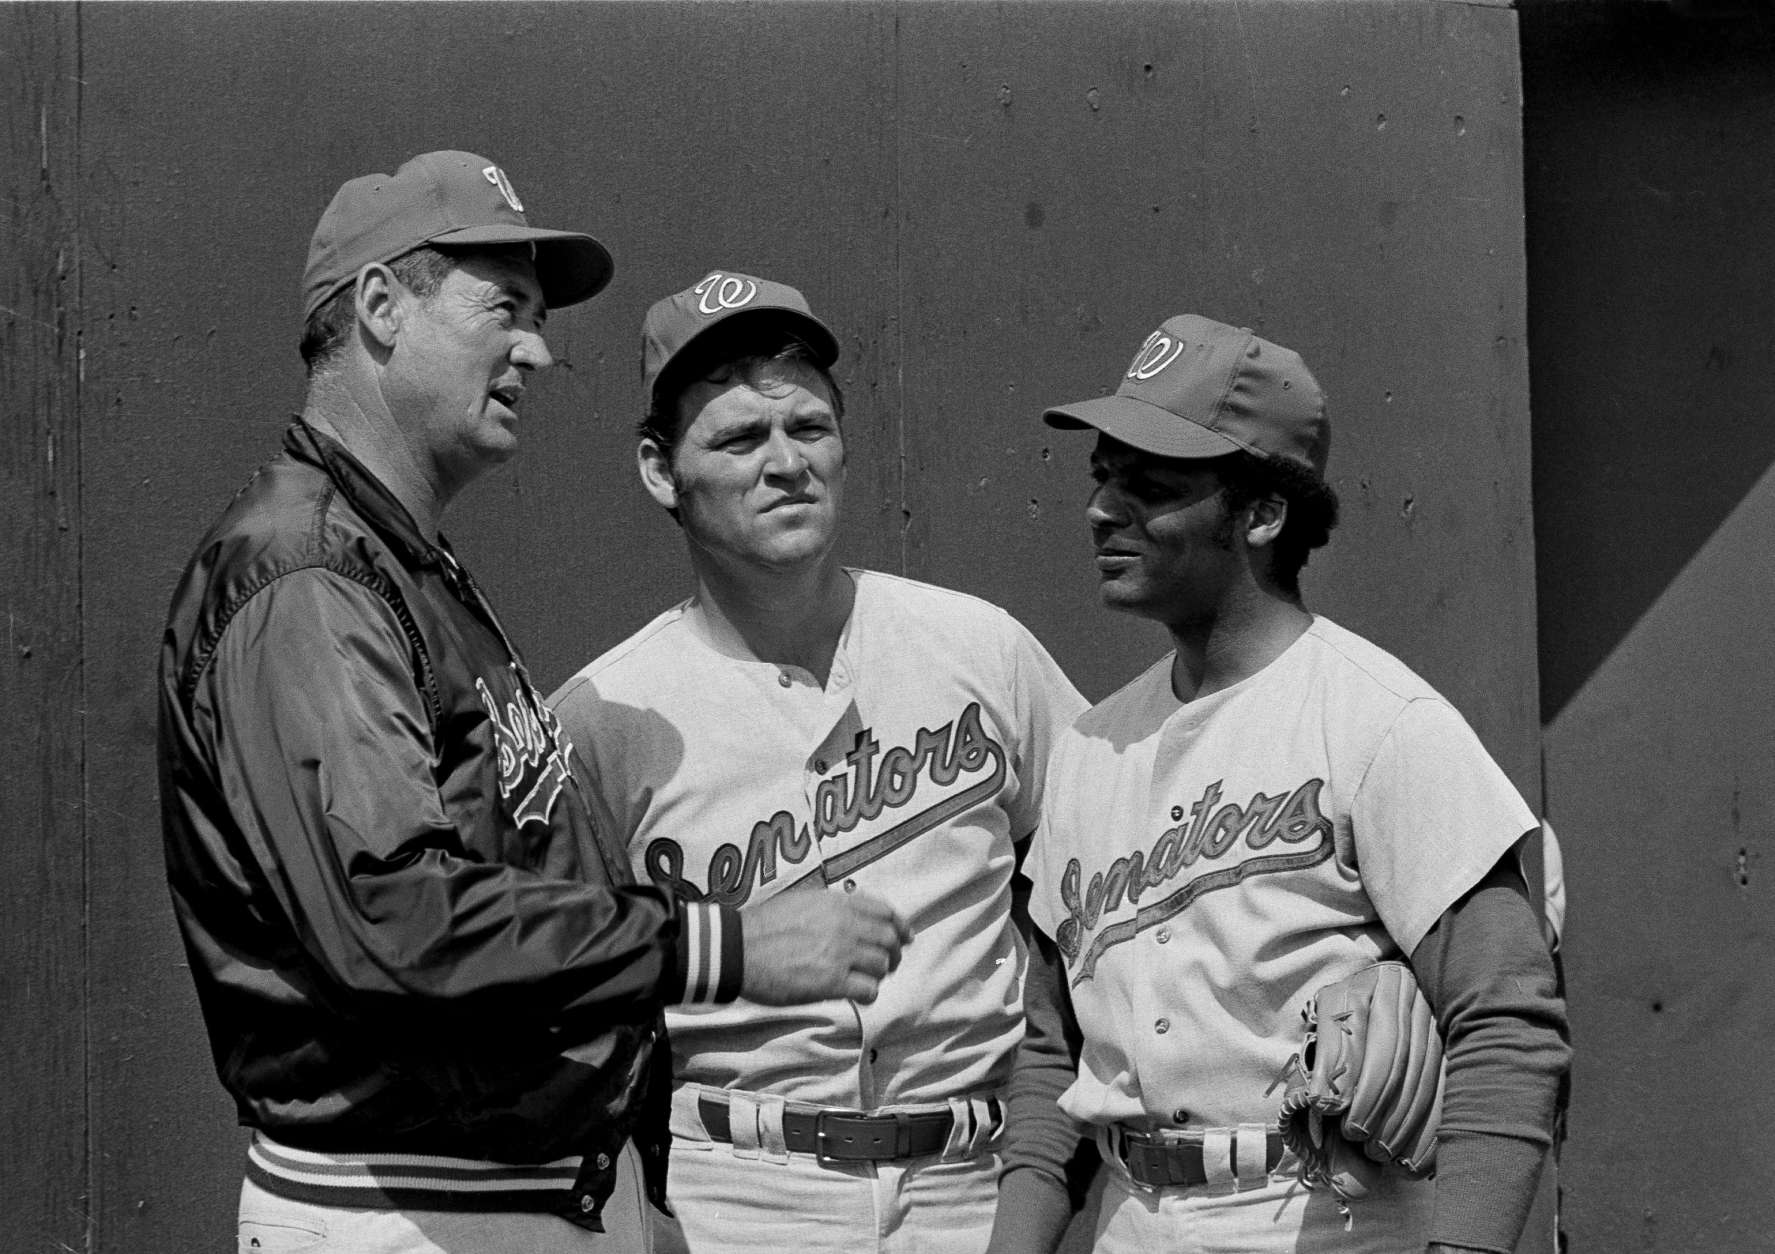 Ted Williams, left, manager of the Washington Senators, holds a private conference with his new additions to the club, Denny McLain, center, and Curt Flood, right, at spring training camp in Pompano Beach, Fla., Feb. 26, 1971. (AP Photo/Robert Houston)